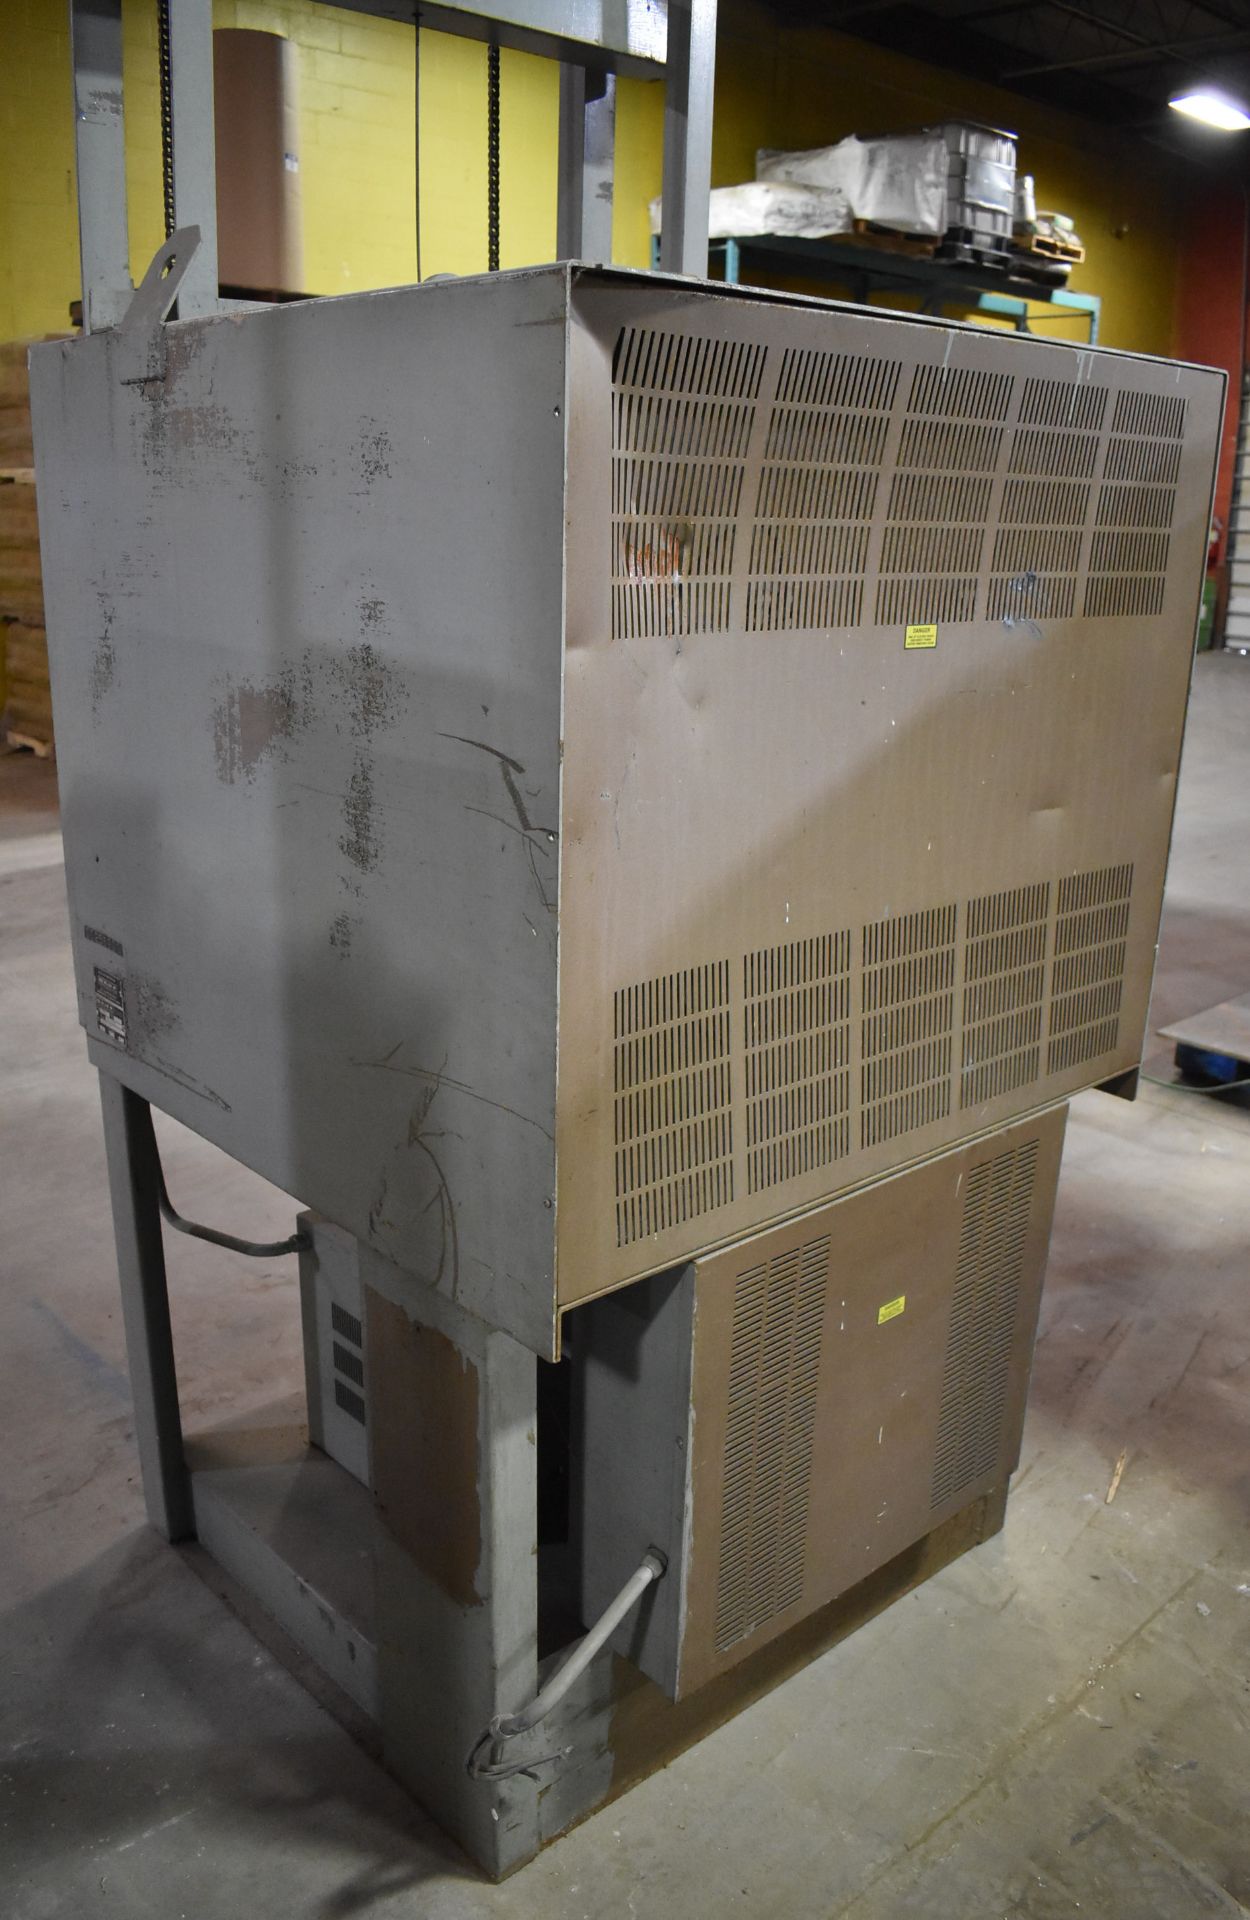 BLUE M 182412G-3 ELECTRIC BOX FURNACE WITH 2000 DEG. F. MAX. TEMPERATURE, 18"X12"X24"D INTERIOR - Image 2 of 4